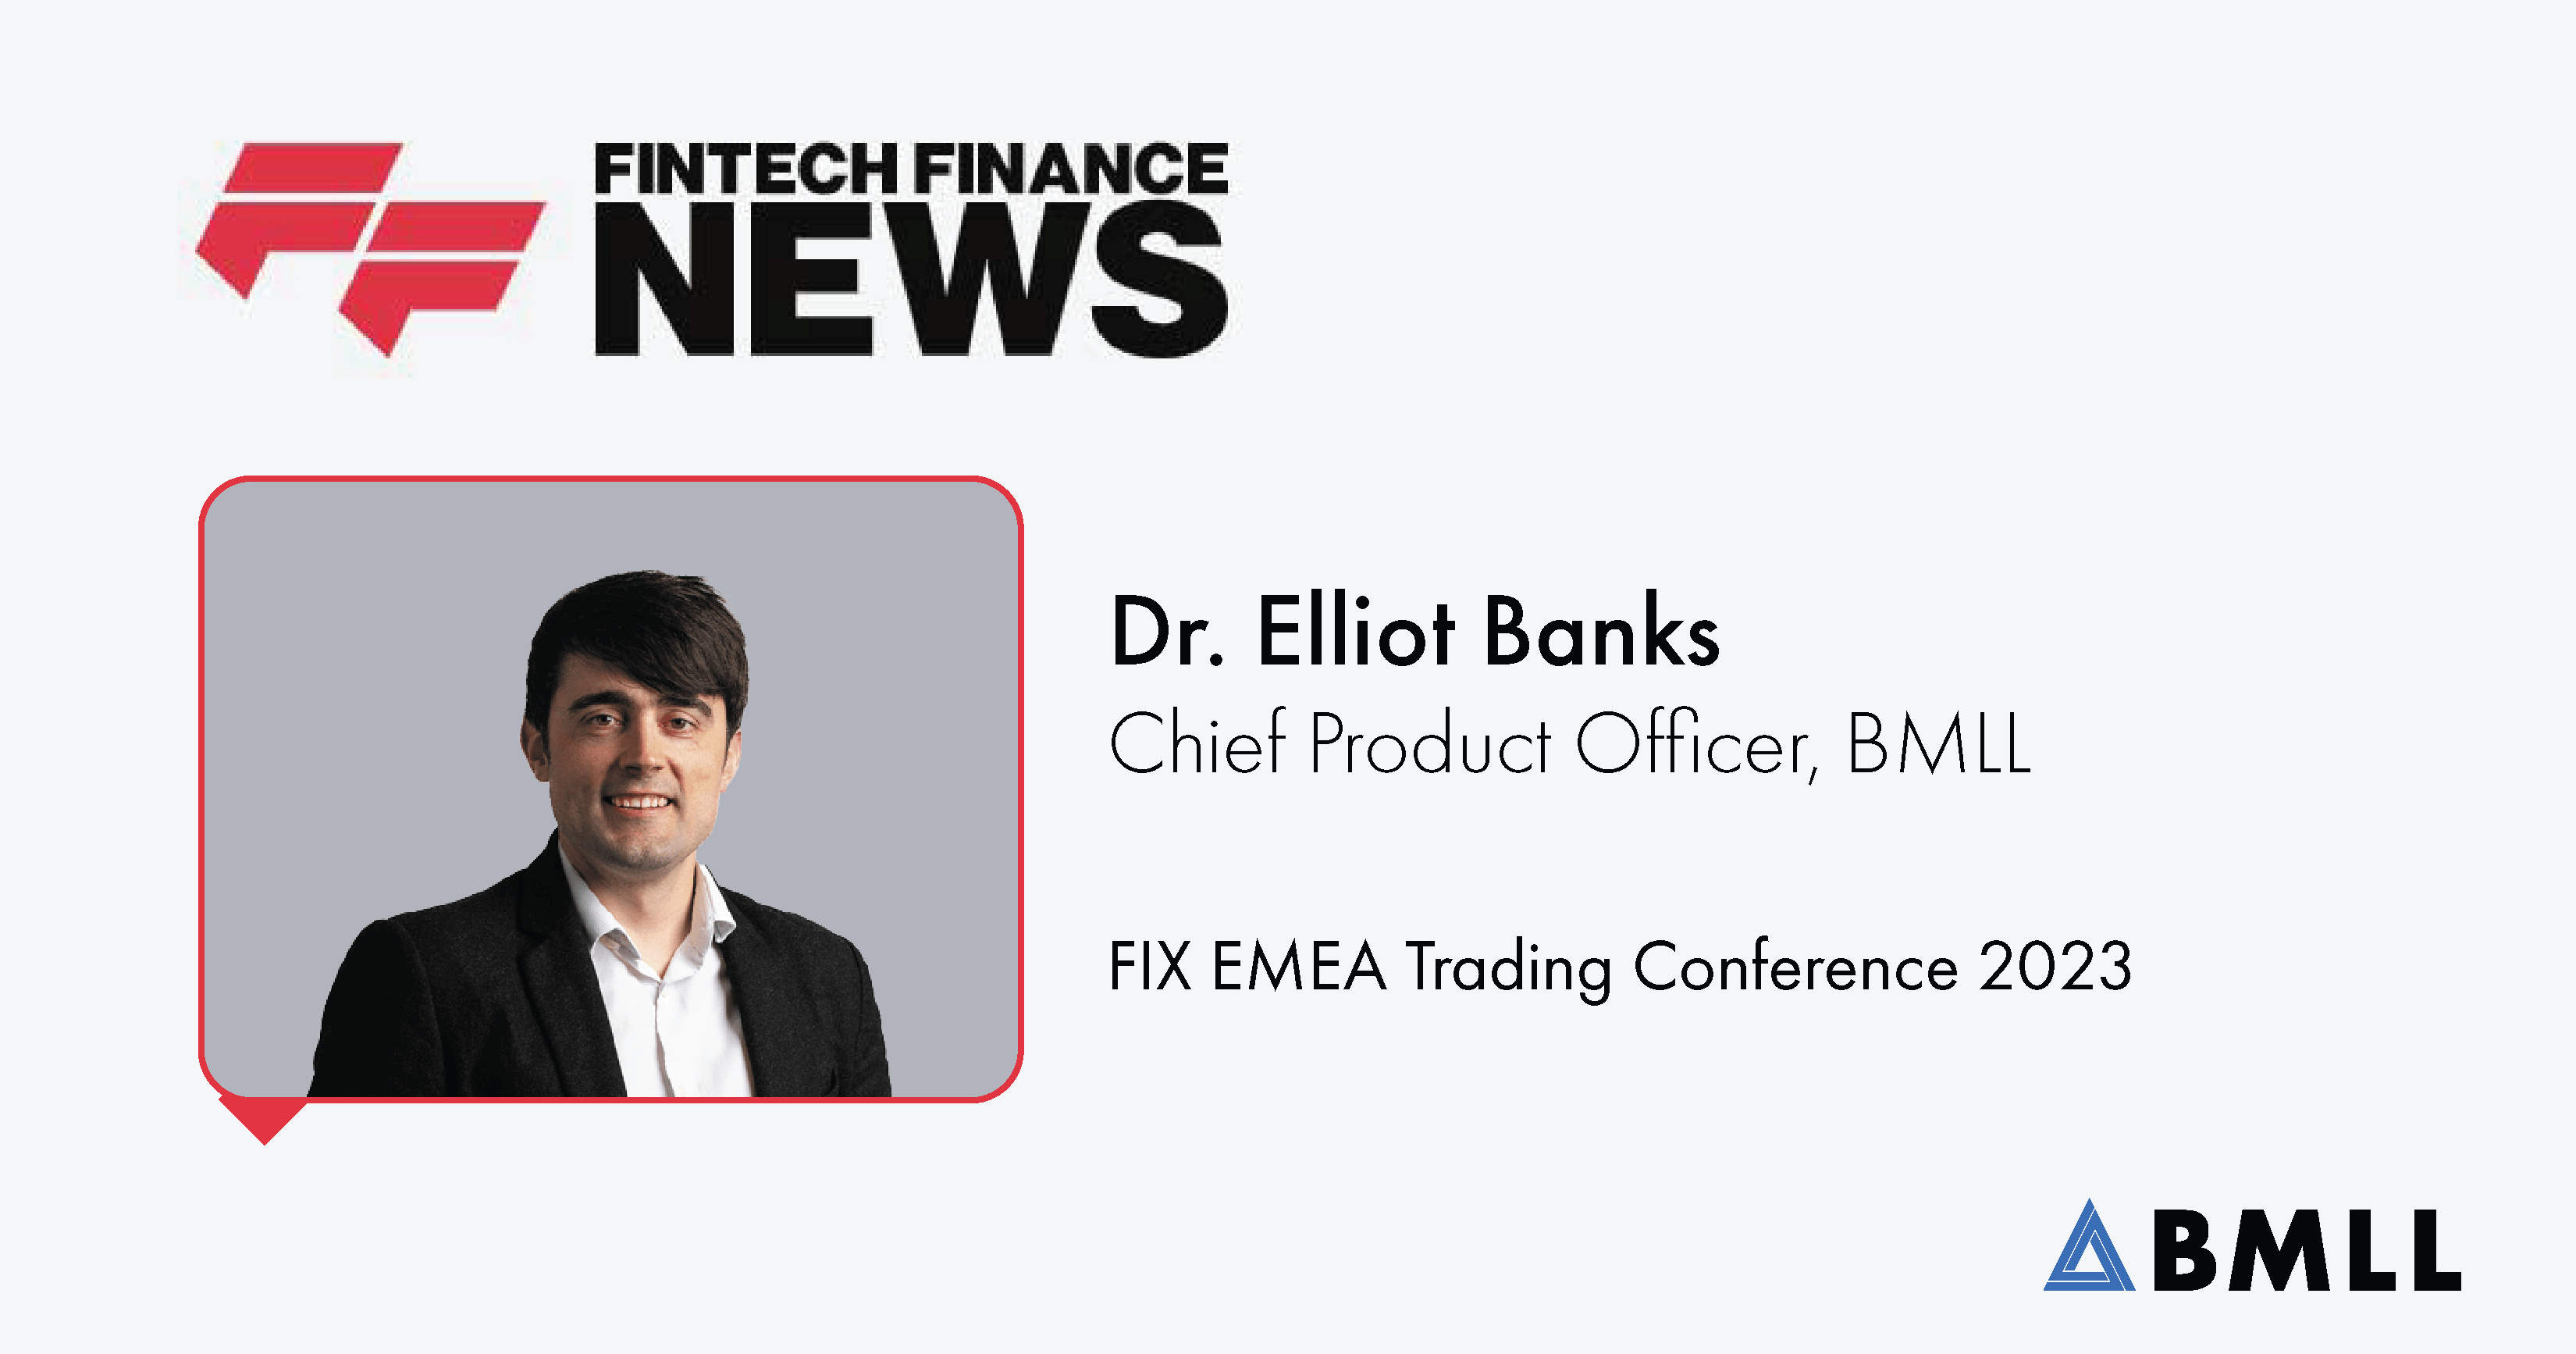 Photo for Dr Elliot Banks discusses Level 3 Data with Fintech Finance News at the 2023 FIX EMEA Trading Conference news story